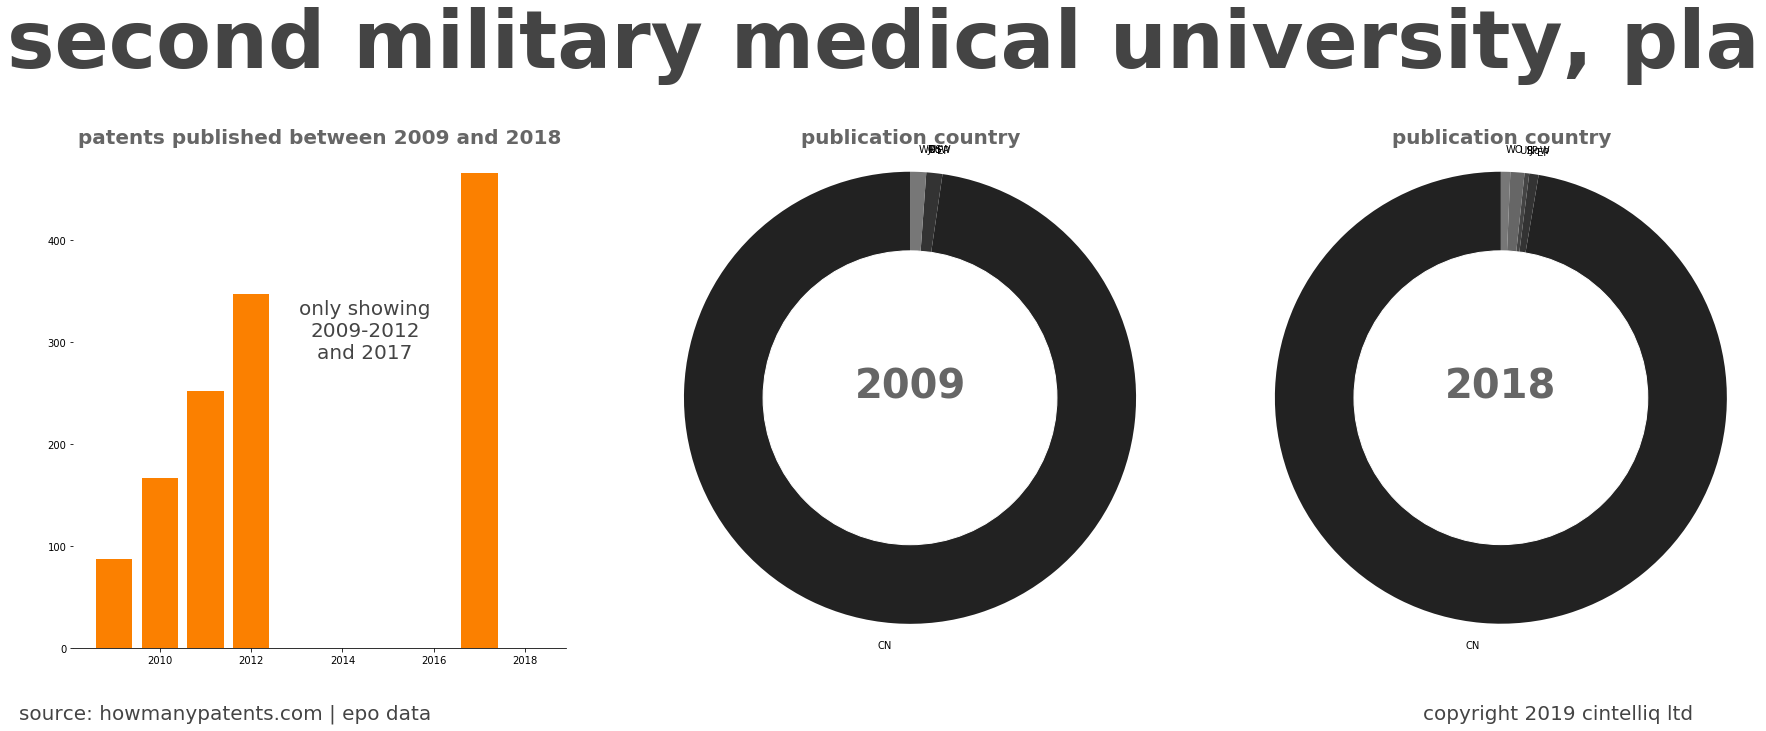 summary of patents for Second Military Medical University, Pla